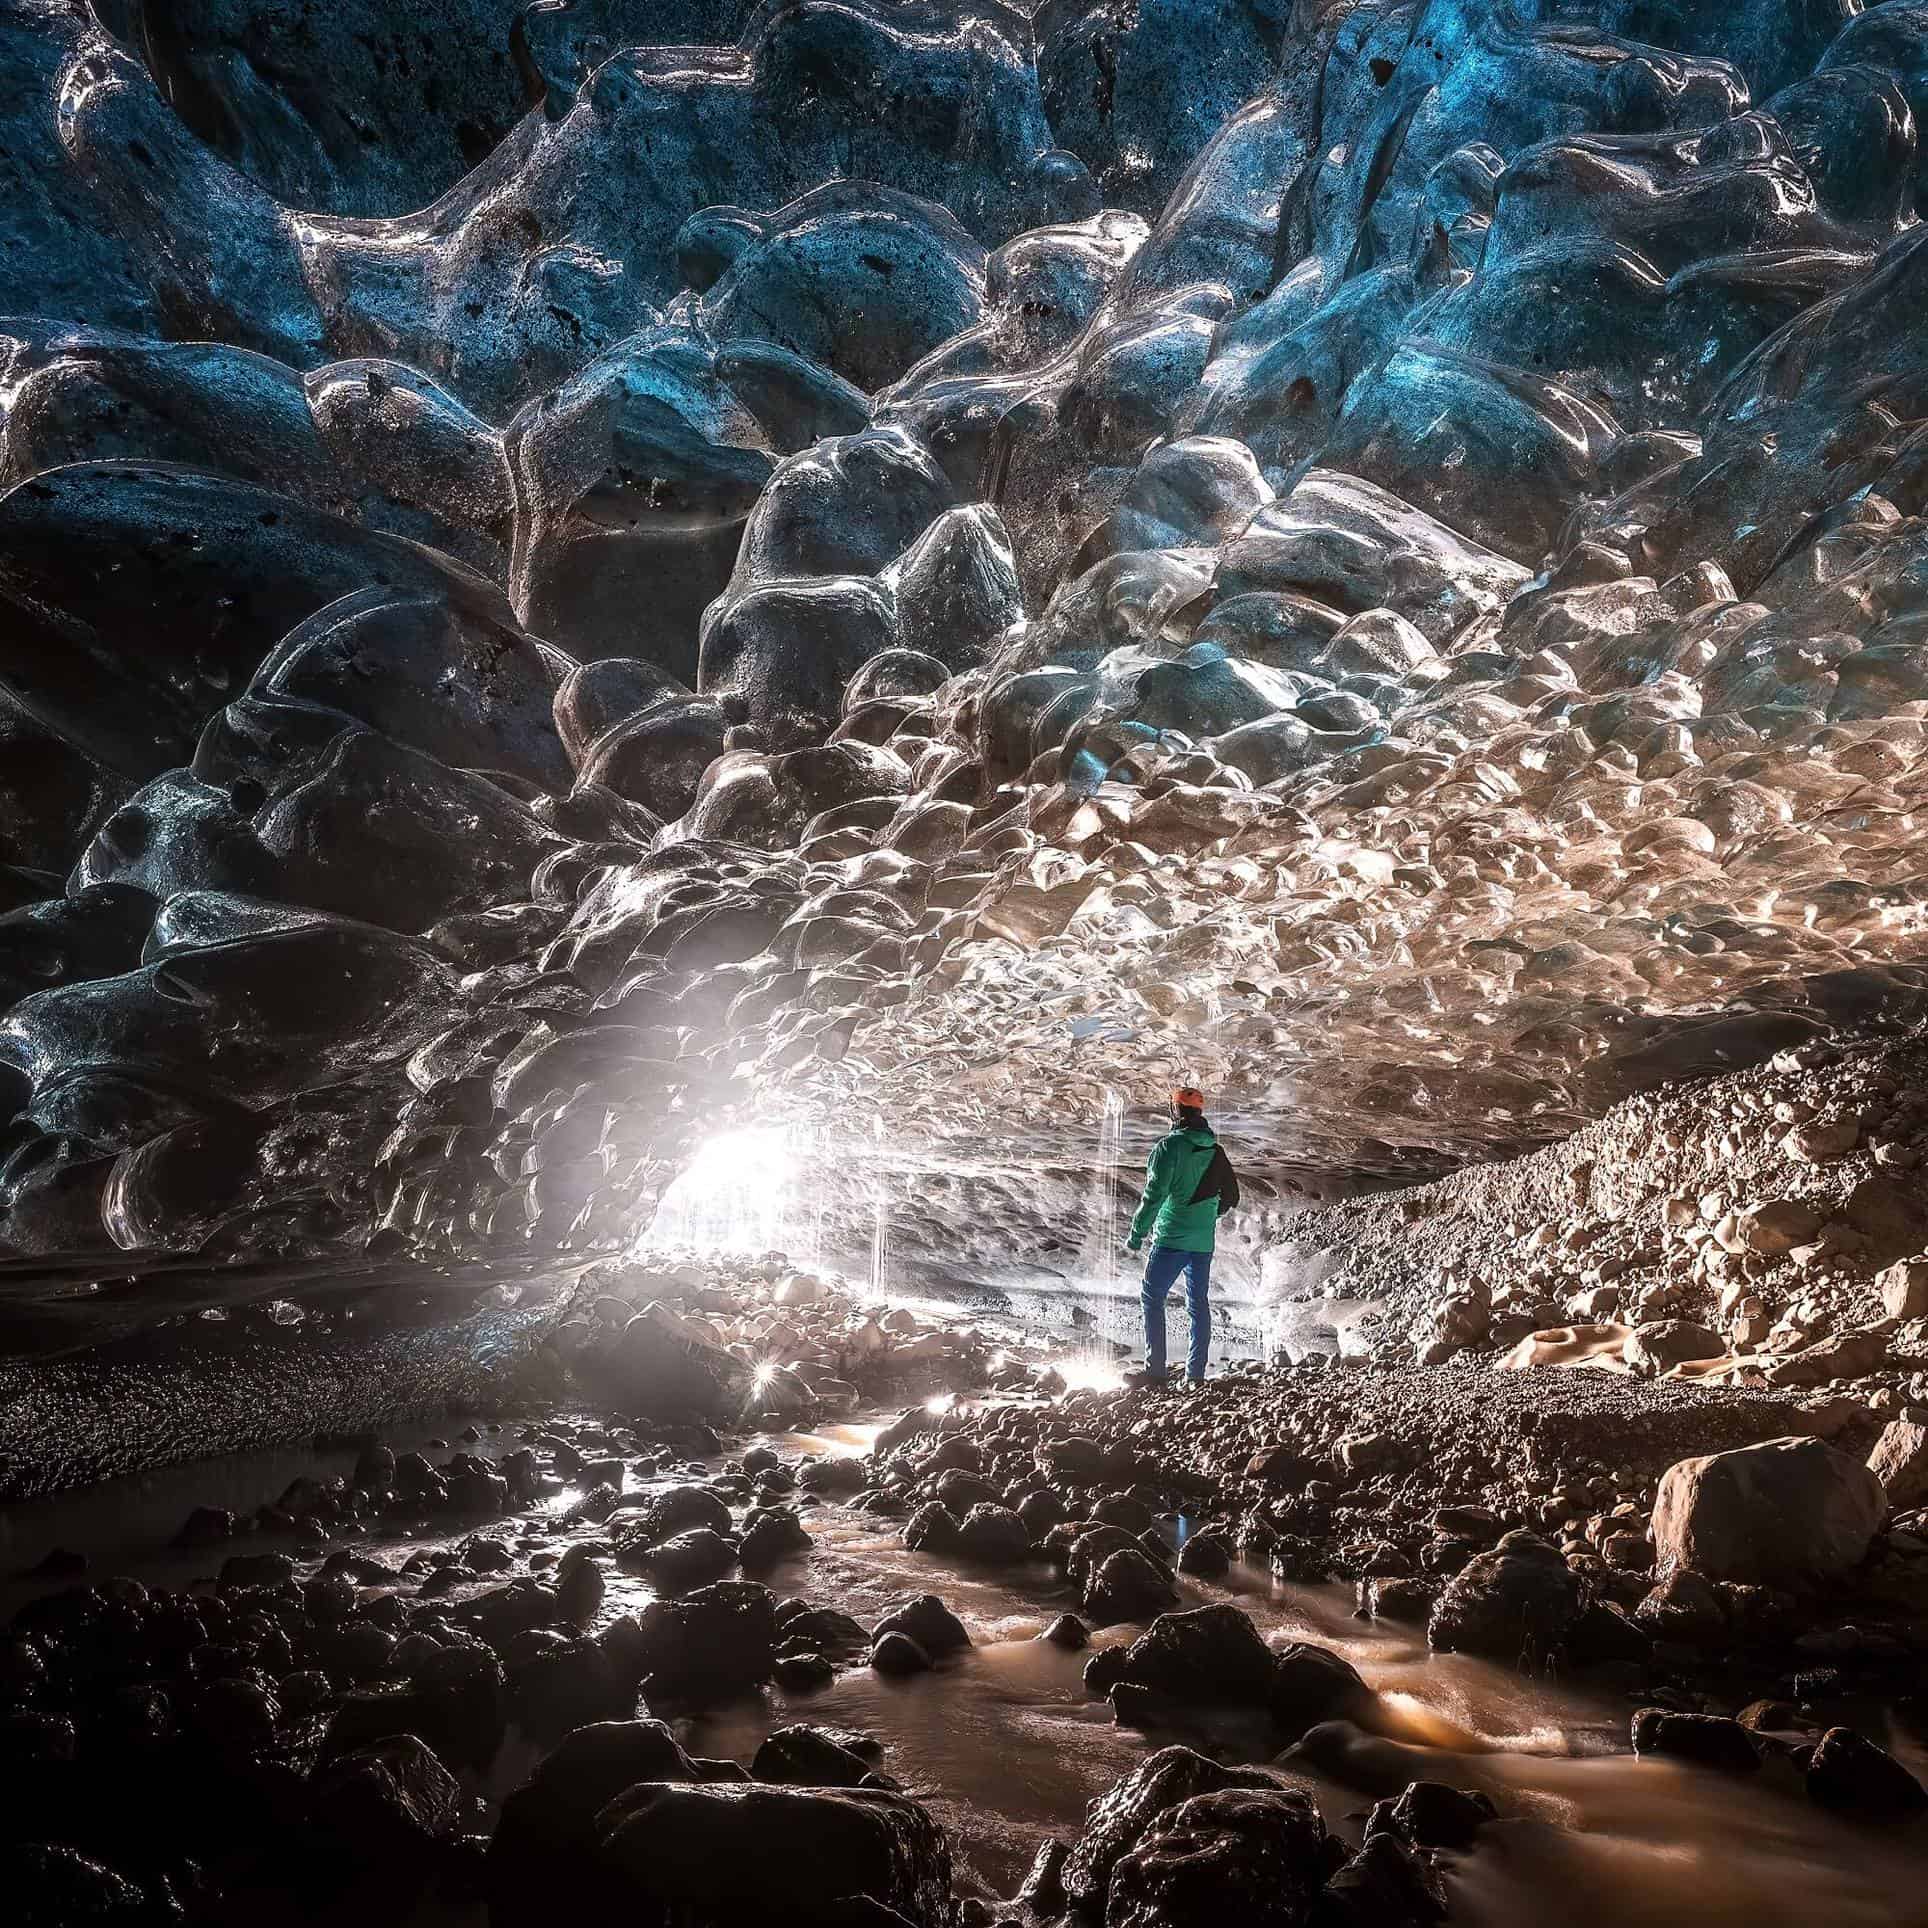 Sun streams into an ice cave where a man stands atop rocky boulders.